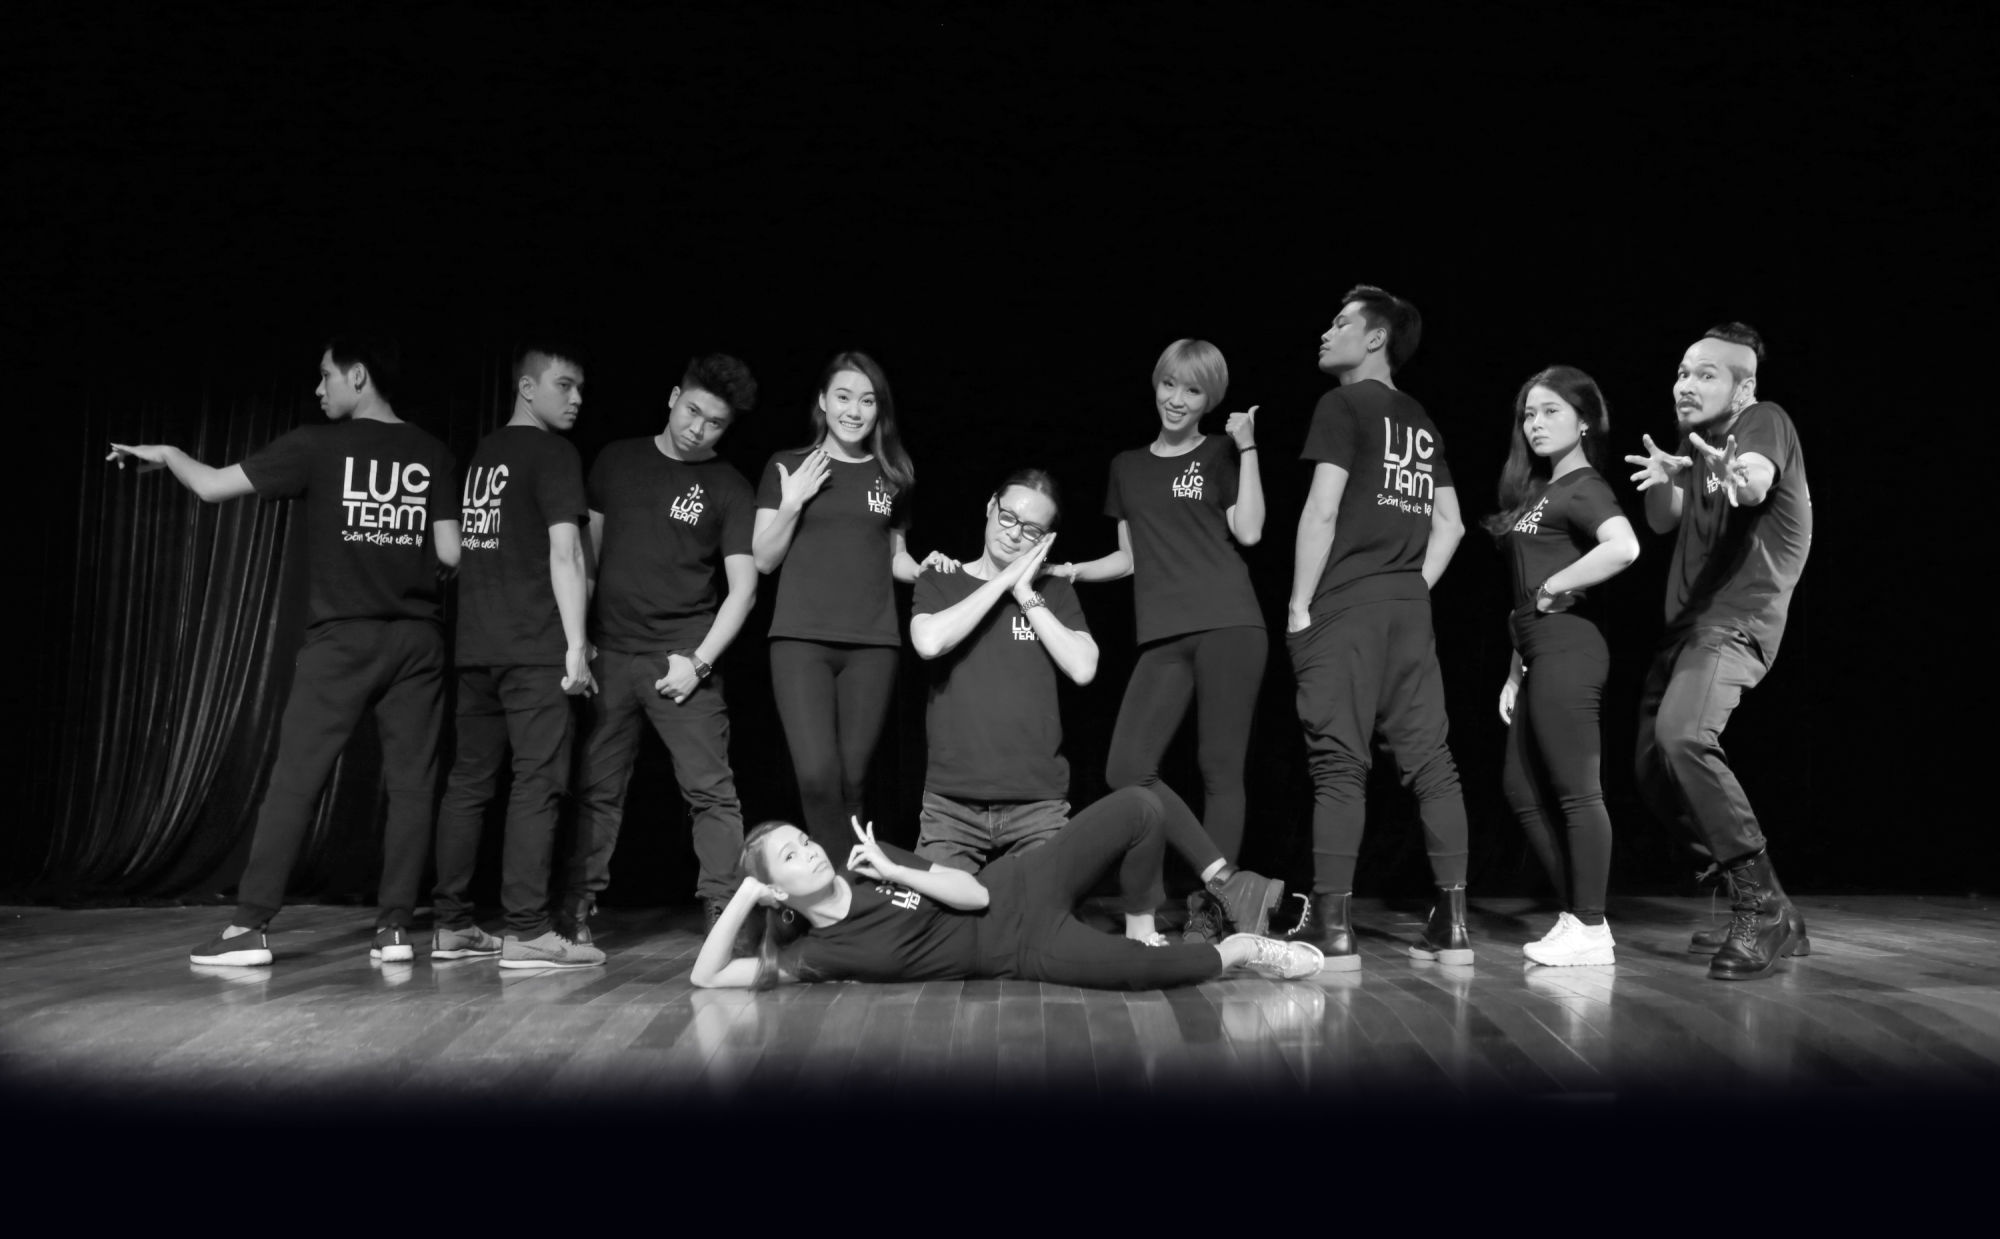 LucTeam is an art troupe consisting of teachers and students (Photo: LucTeam)